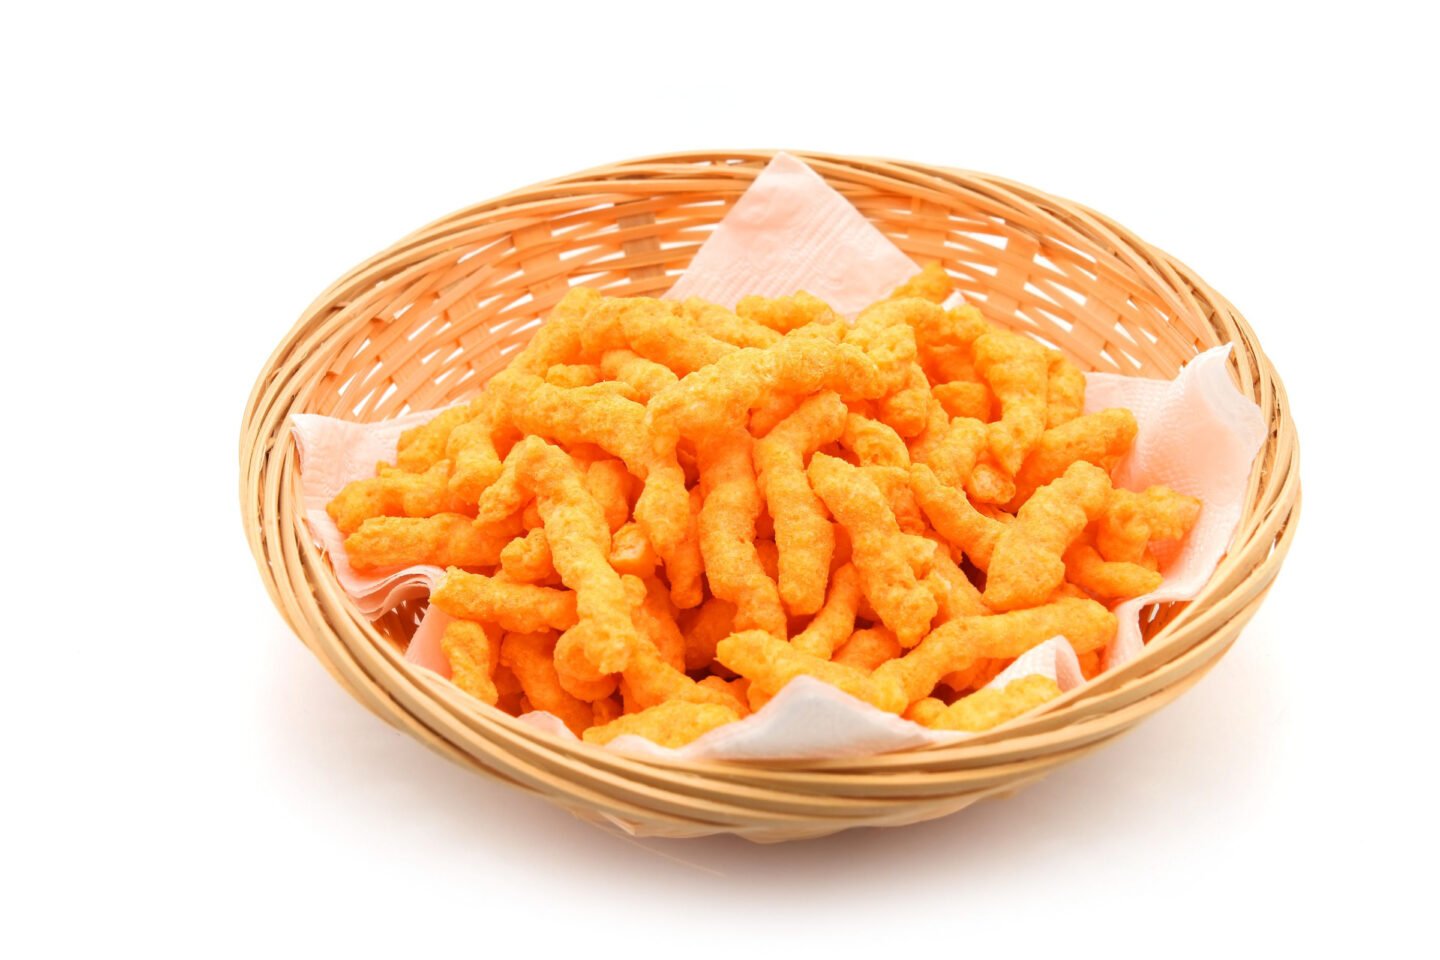 cheese flavored snacks cheetos in a basket